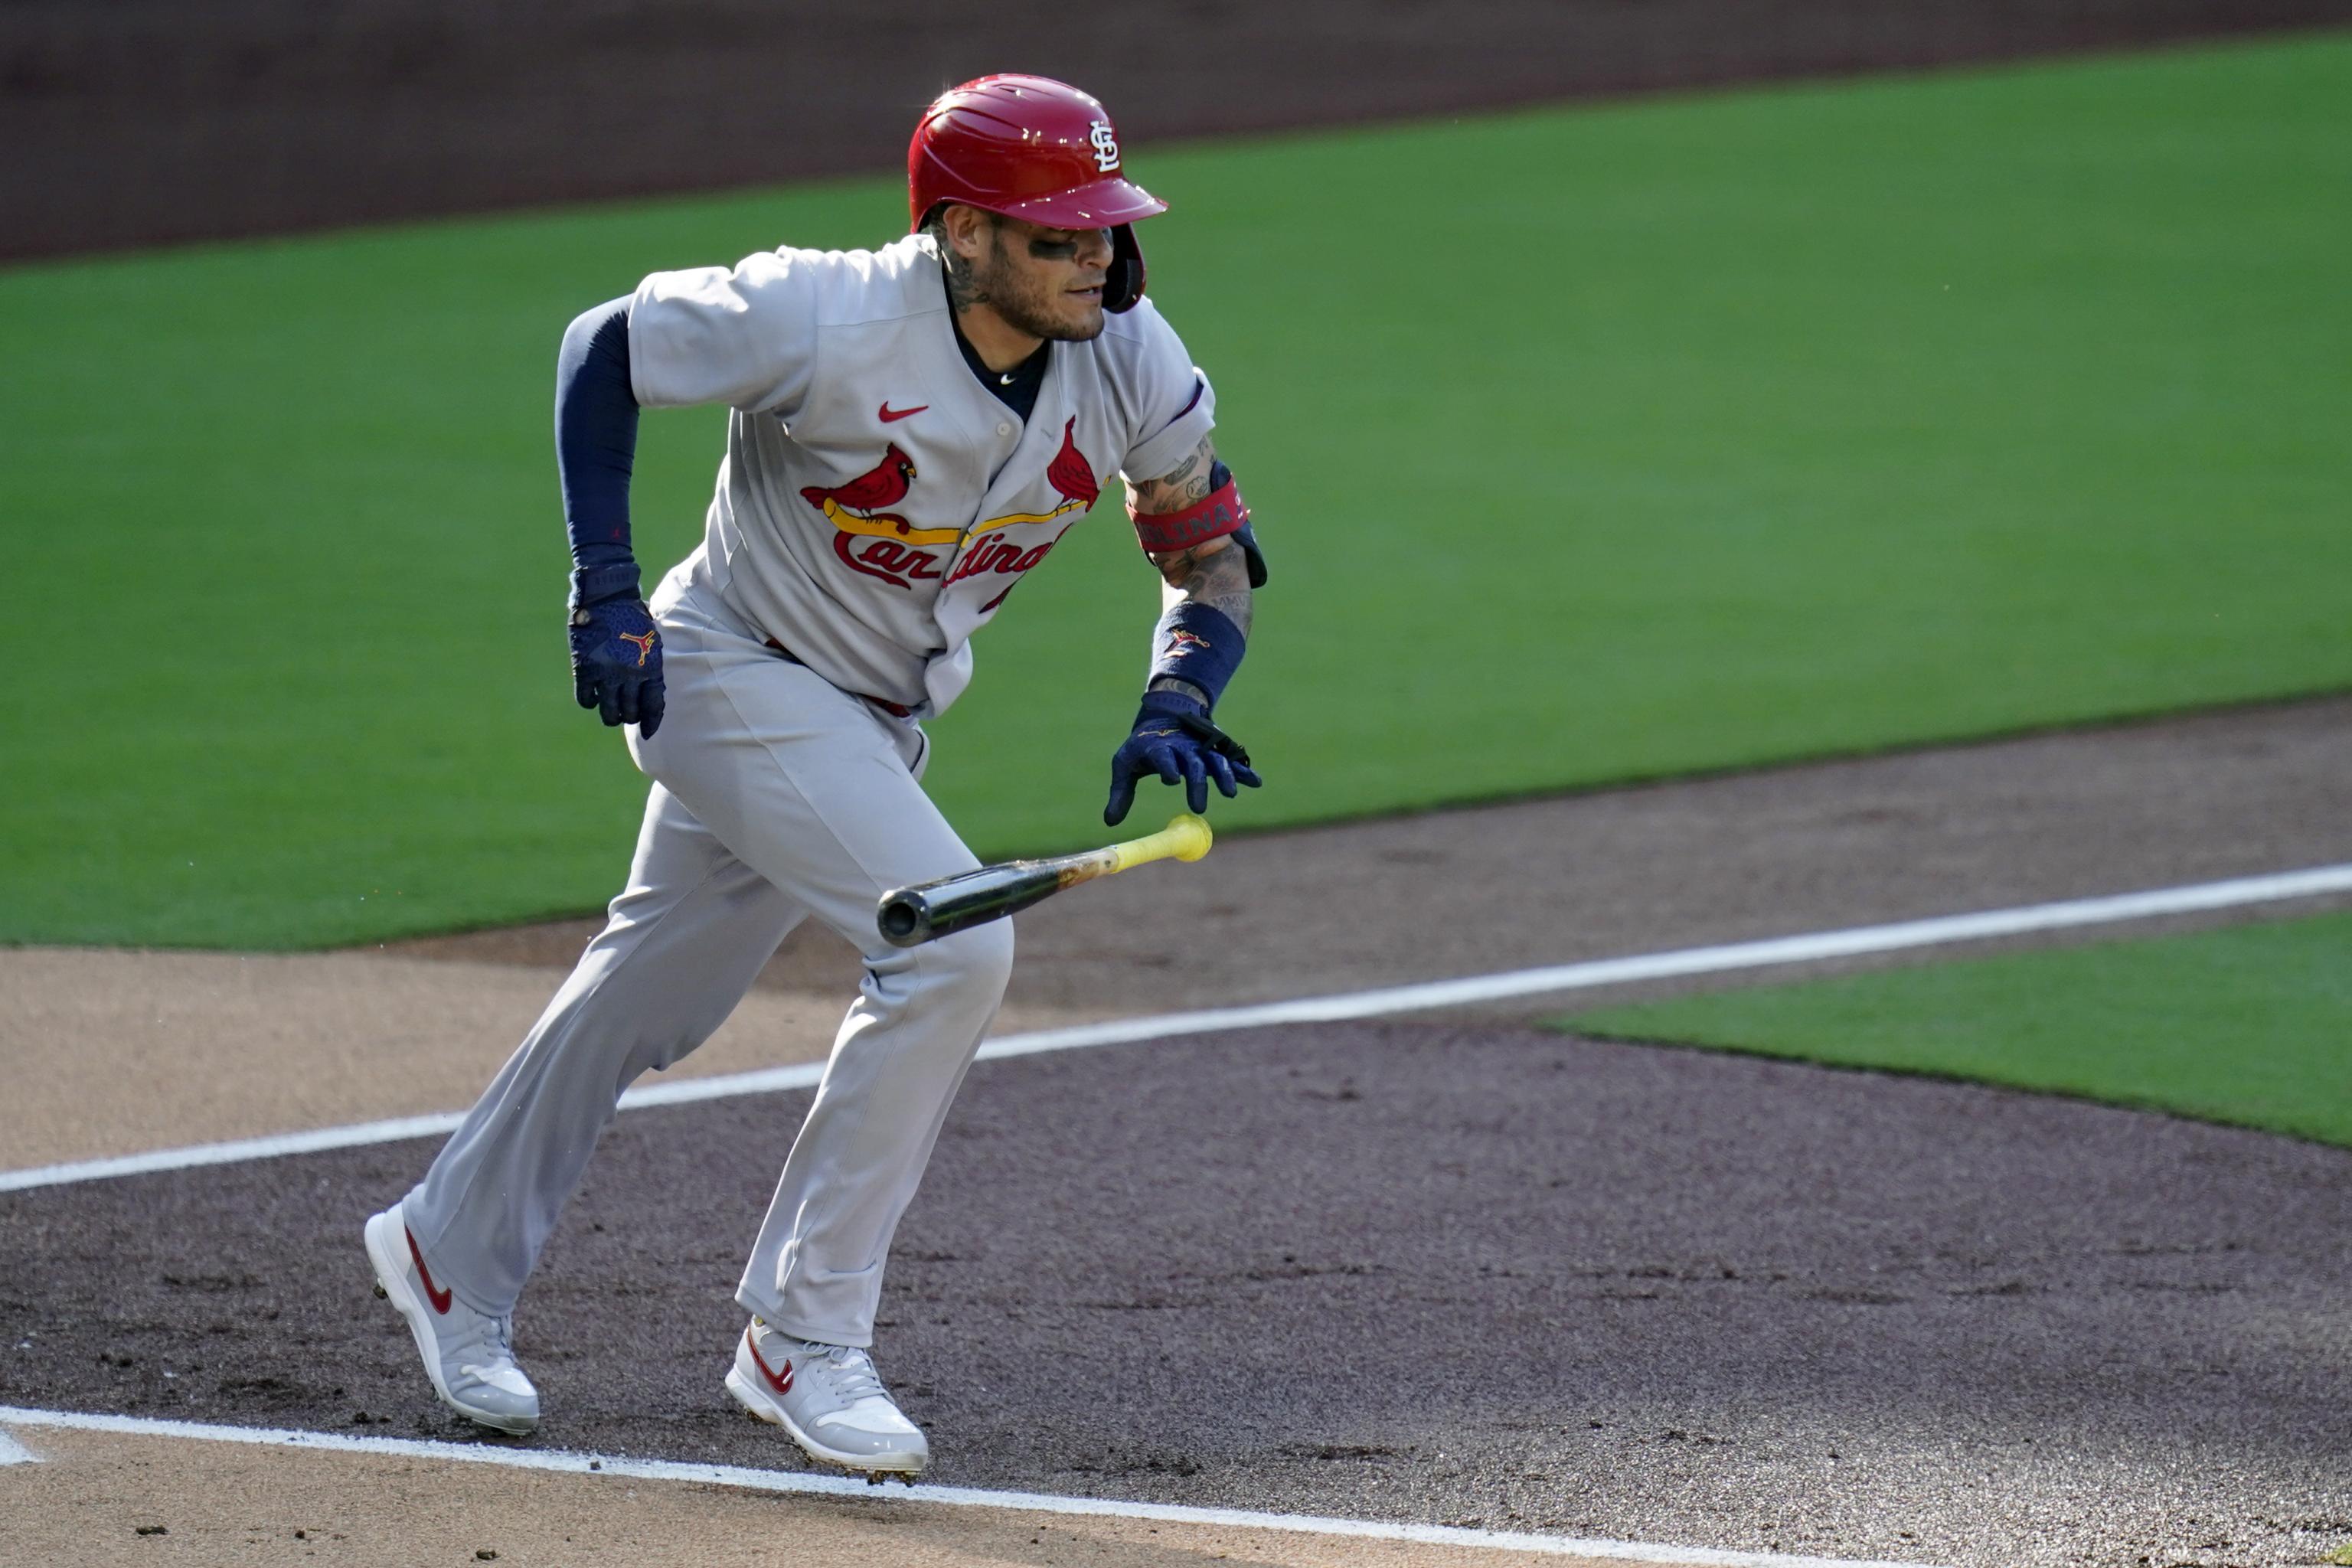 Cardinals' Updated Lineup, Payroll After Yadier Molina's Reported